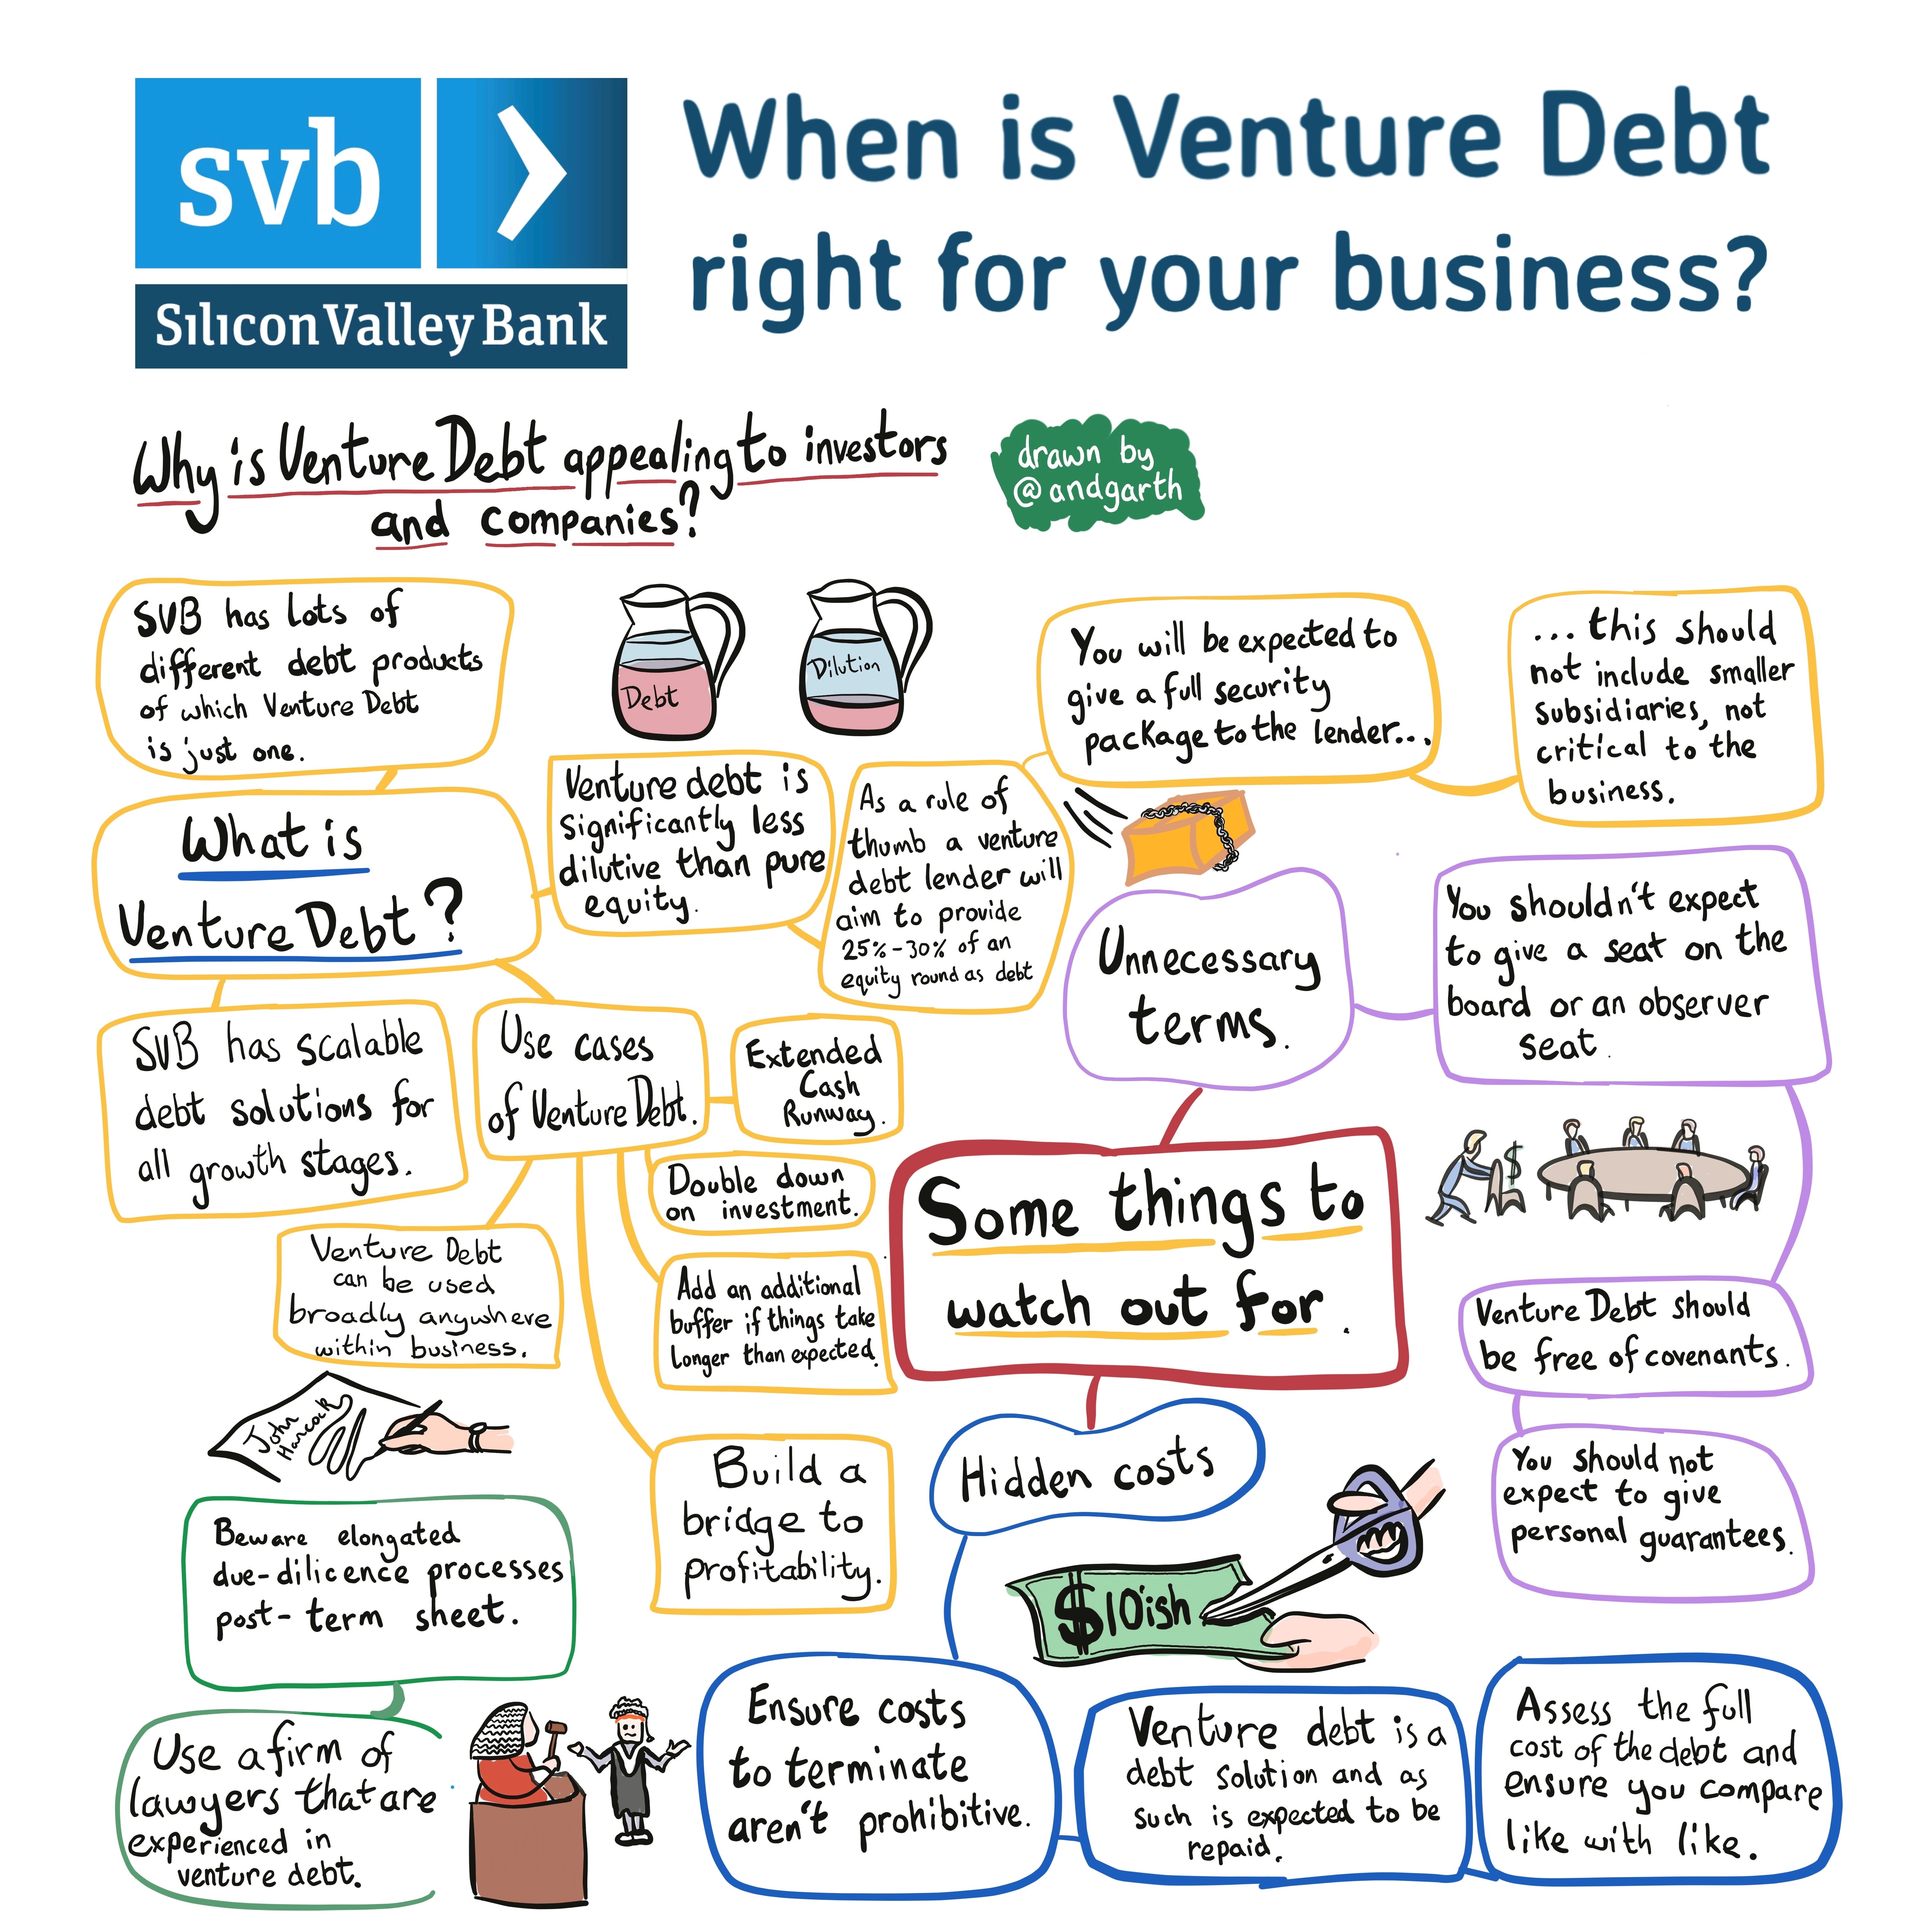 What types of companies are suitable for venture debt?